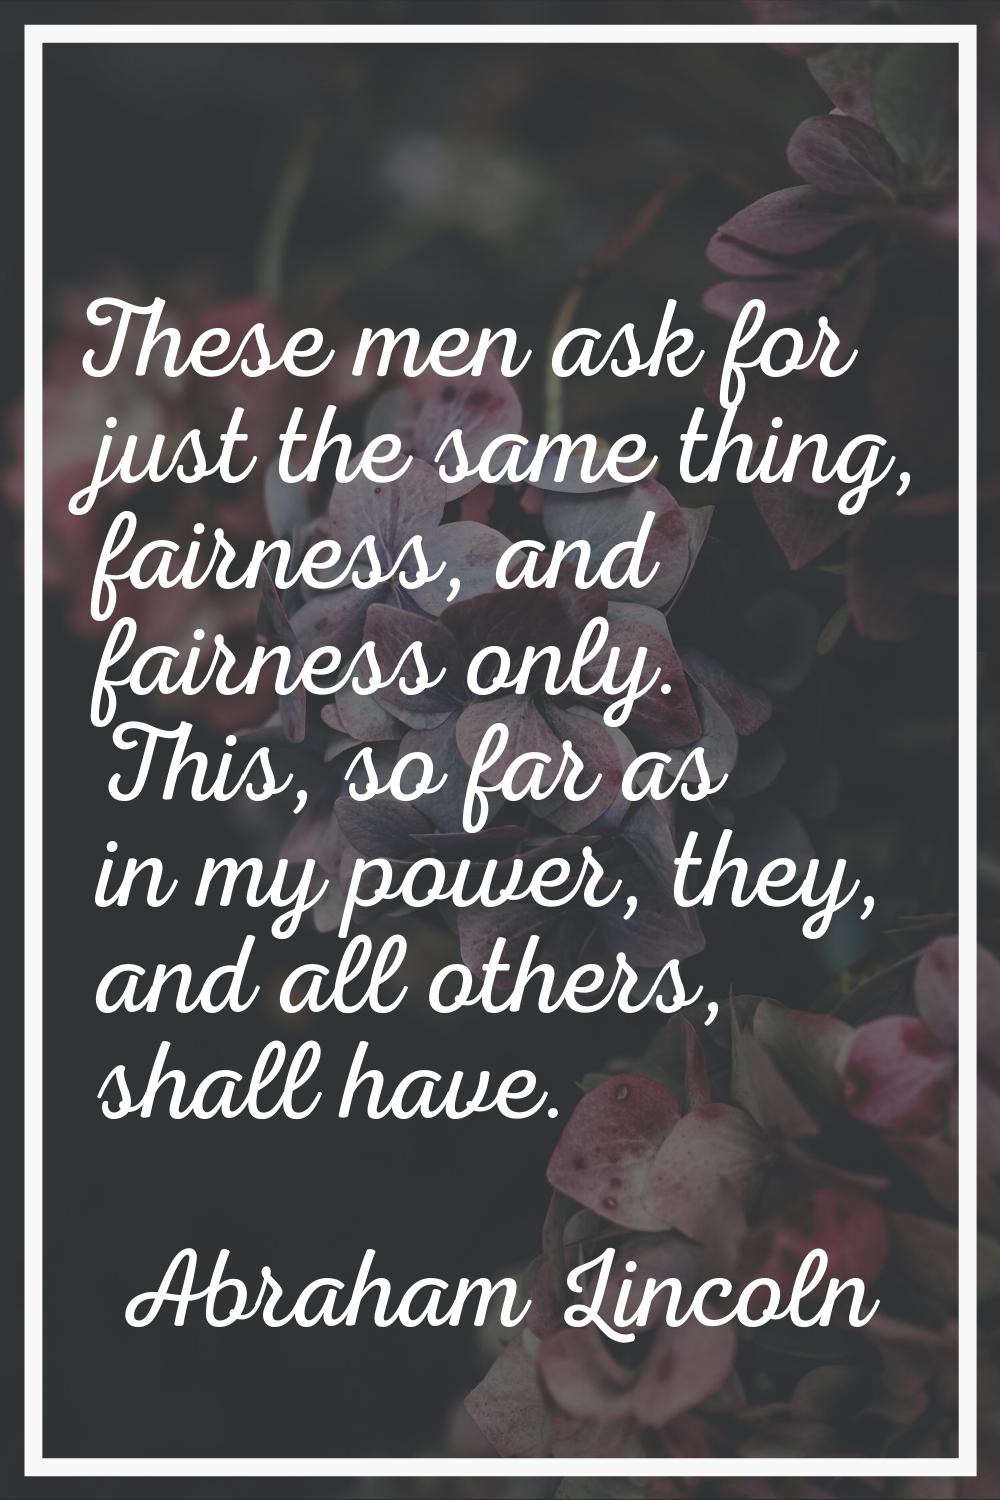 These men ask for just the same thing, fairness, and fairness only. This, so far as in my power, th